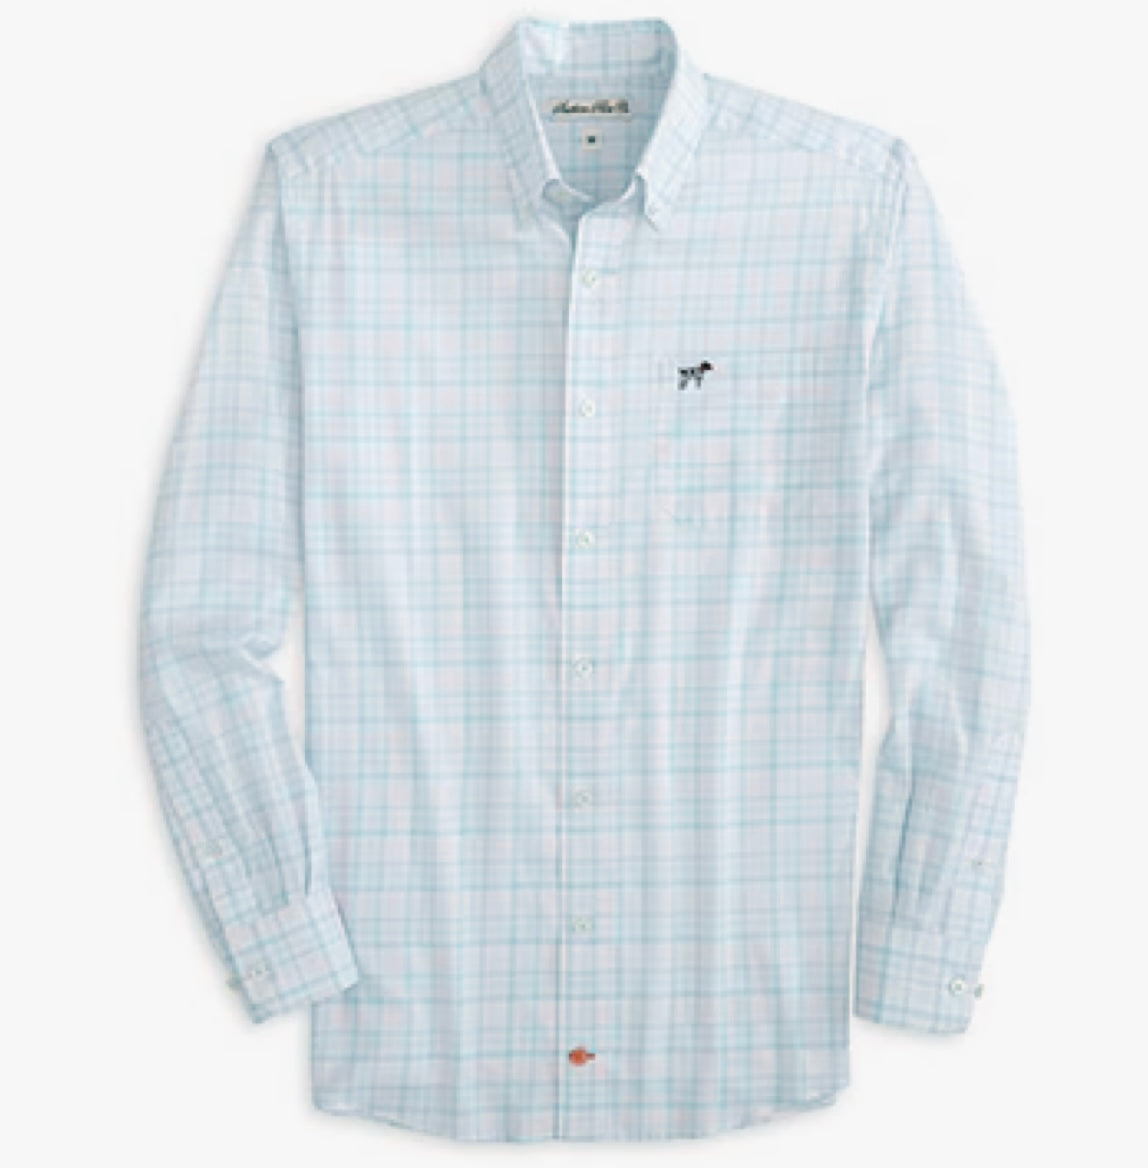 Hadley Breeze Button Down in Spinaker Plaid by Southern Point Co.